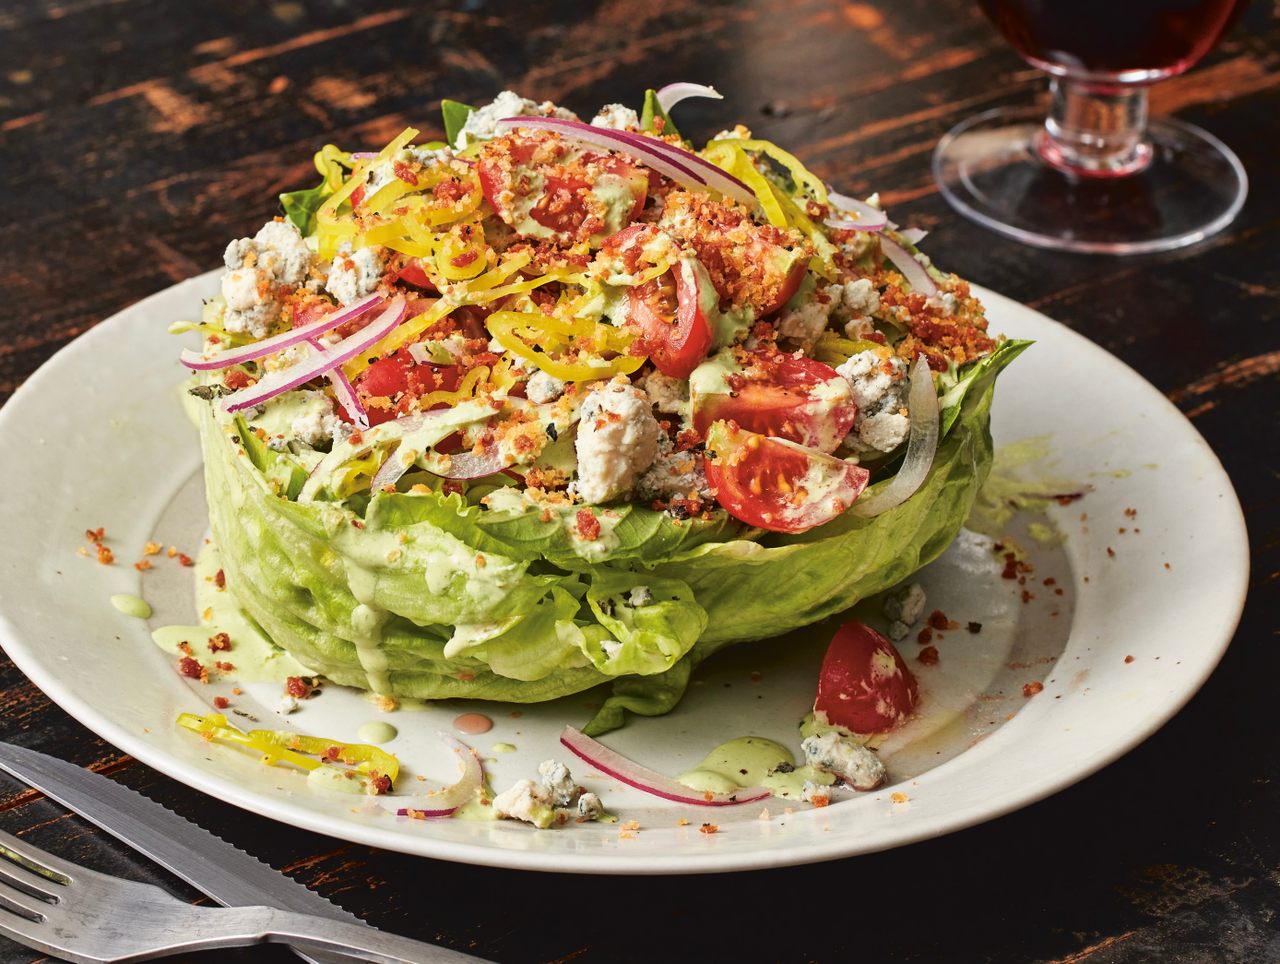 Don Angie's version of a wedge salad includes a creamy anchovy dressing and pepperoni fat-crisped breadcumbs.